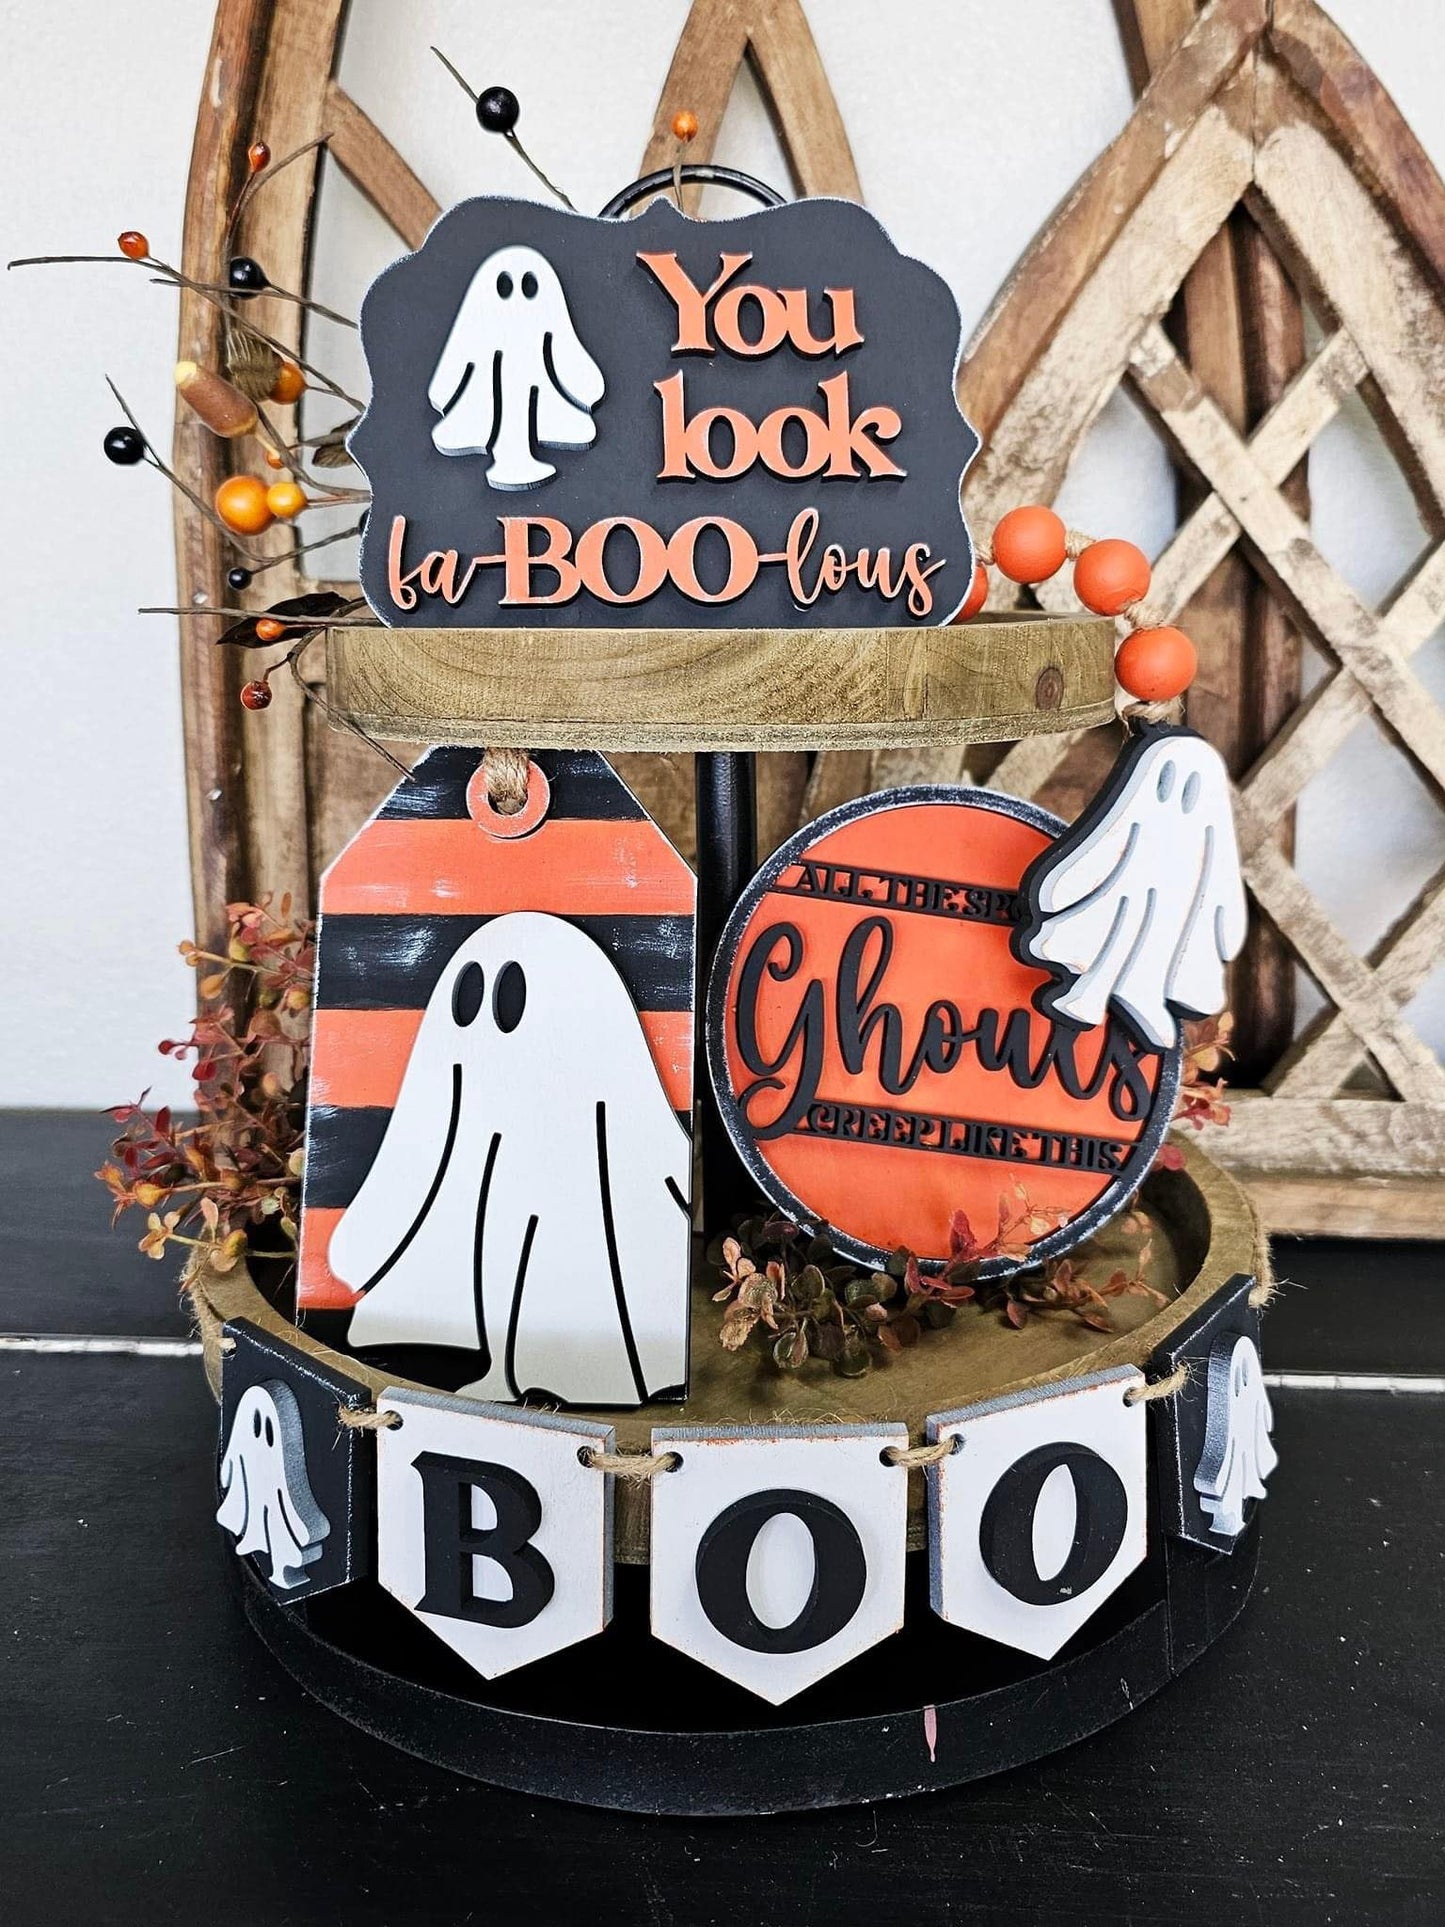 3D Tiered Tray Decor - Boo